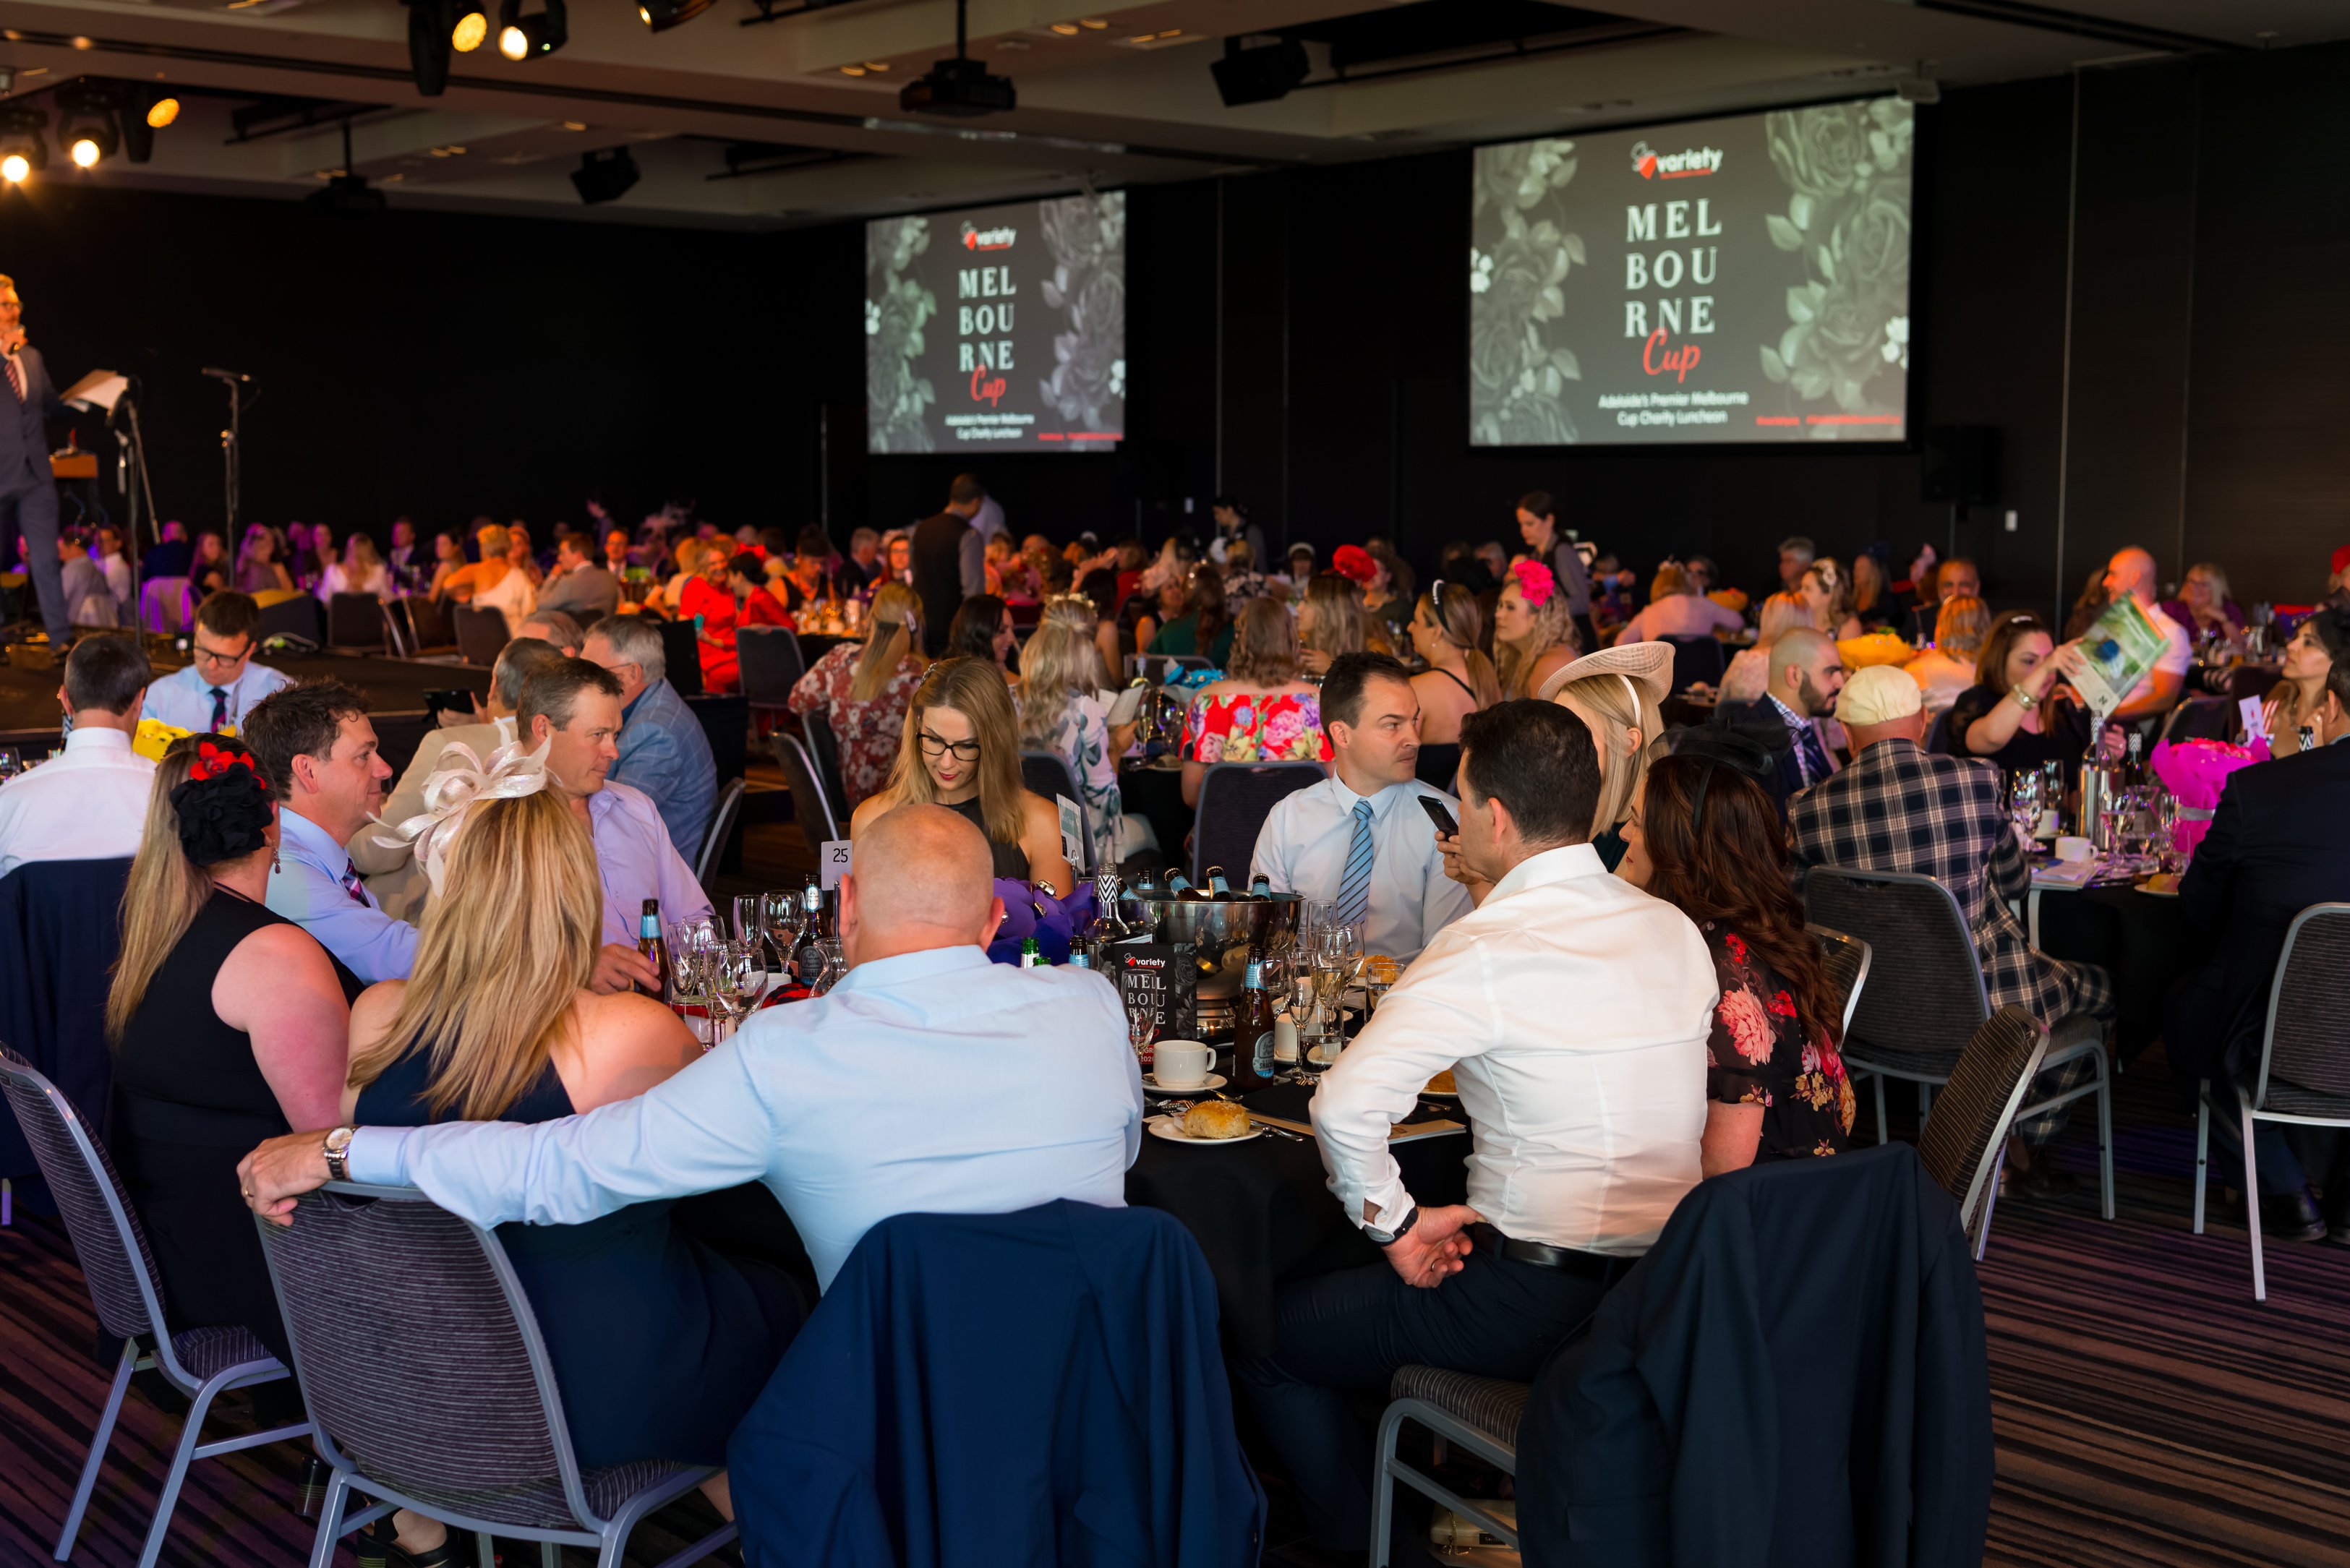 The sold out Variety SA annual Melbourne Cup Charity Luncheon at the Adelaide Convention Centre was a great success!